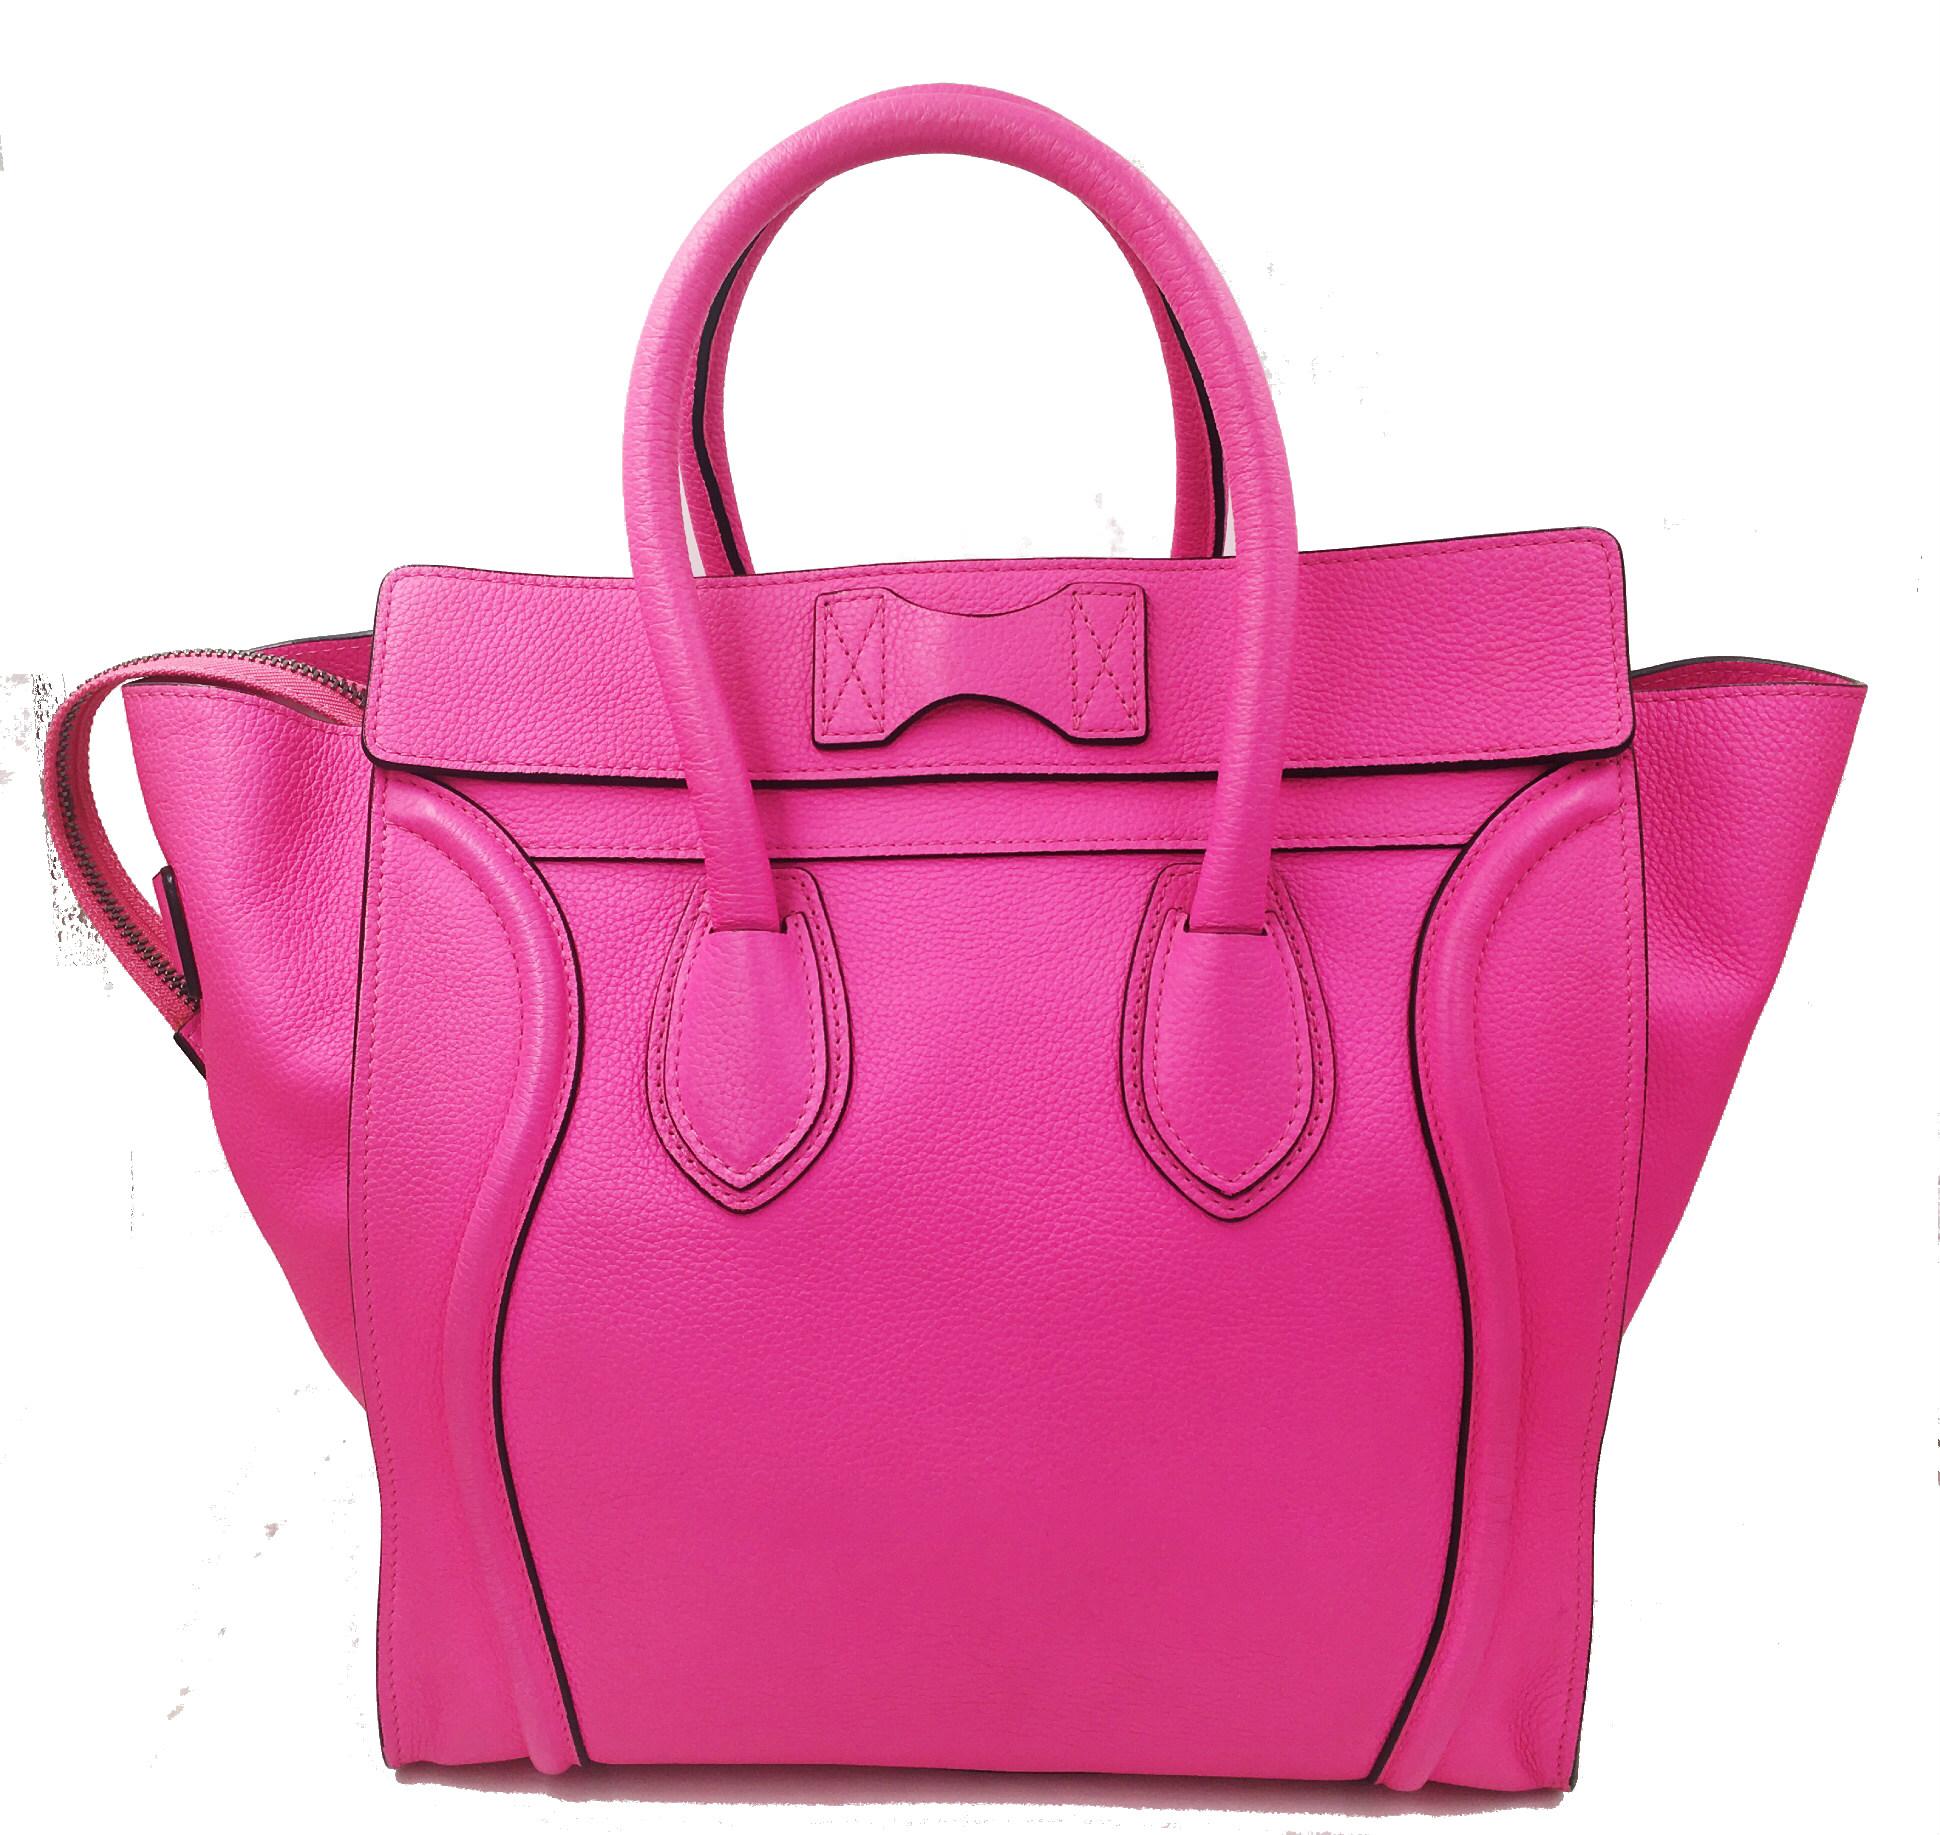 Celine Medium Phantom in Bullhide Leather

Very RARE and Most Wanted Color! Limited Edition and Perfect for Spring!!!

Guaranteed Authentic. Authenticated by the most trusted online authenticator, AuthenticateFirst
12